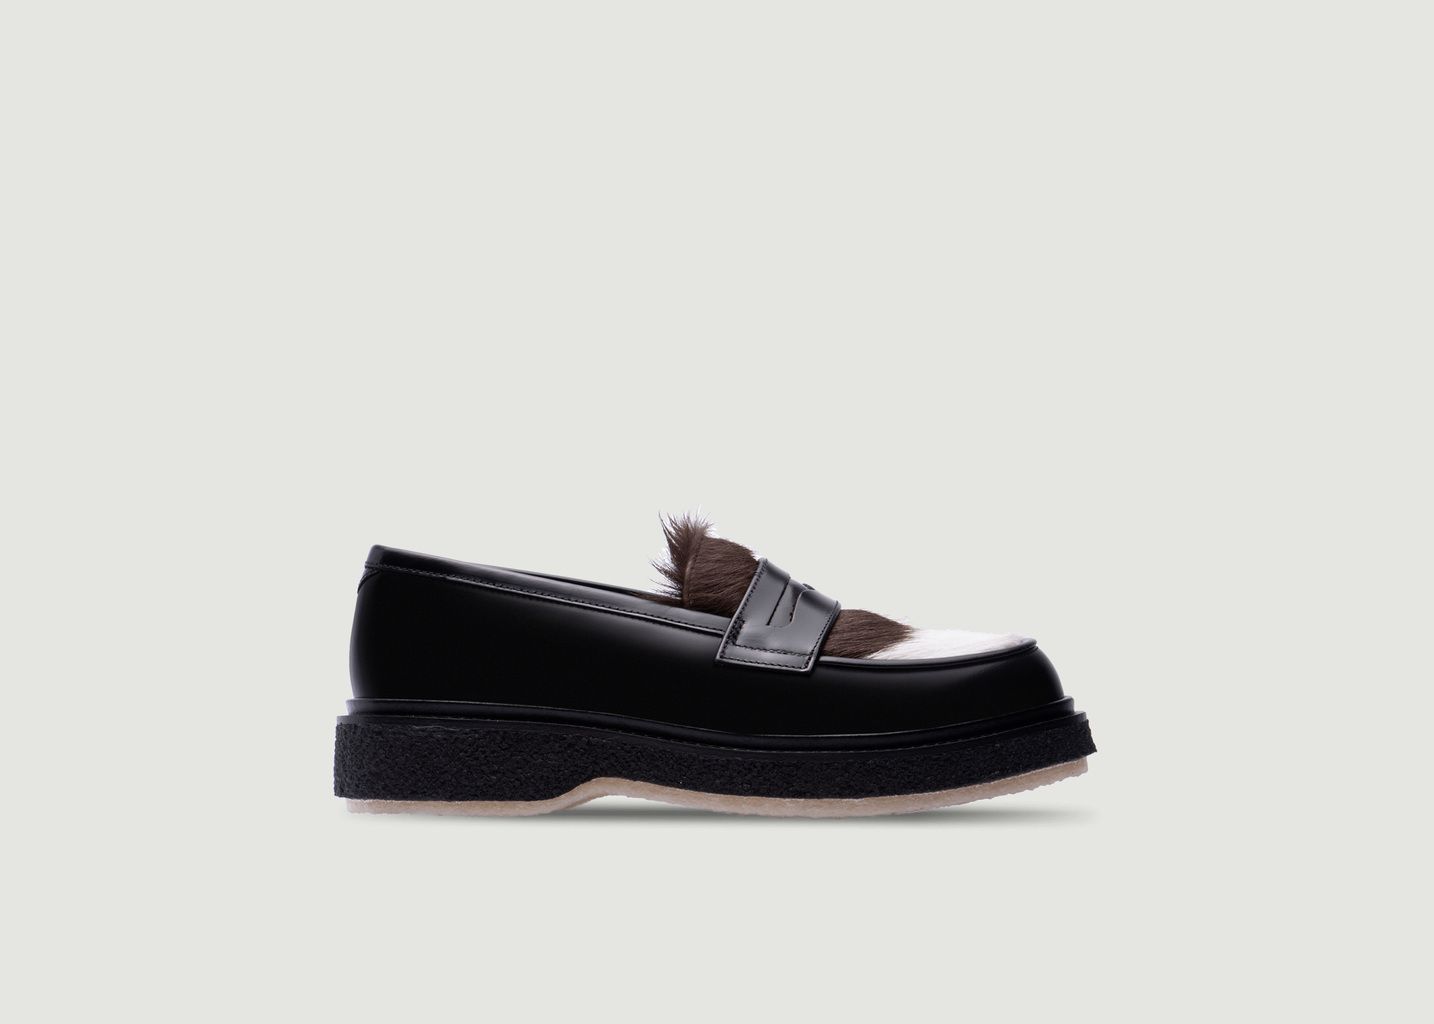 Type 05 Adieu x Très Bien leather and naturel hairs loafers - Adieu